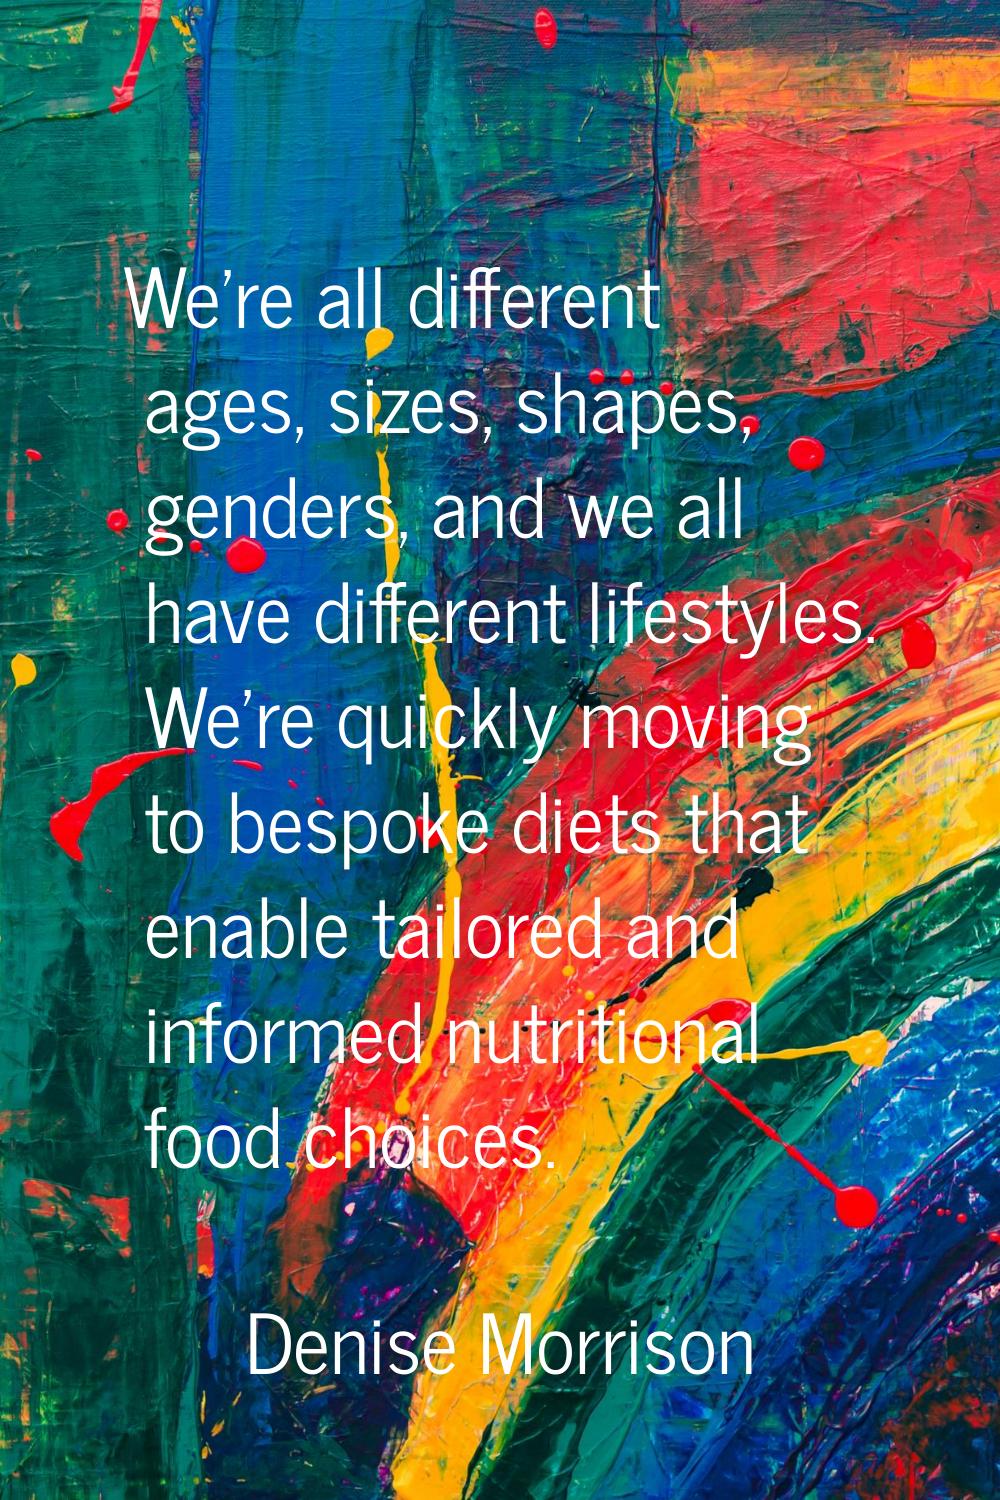 We're all different ages, sizes, shapes, genders, and we all have different lifestyles. We're quick